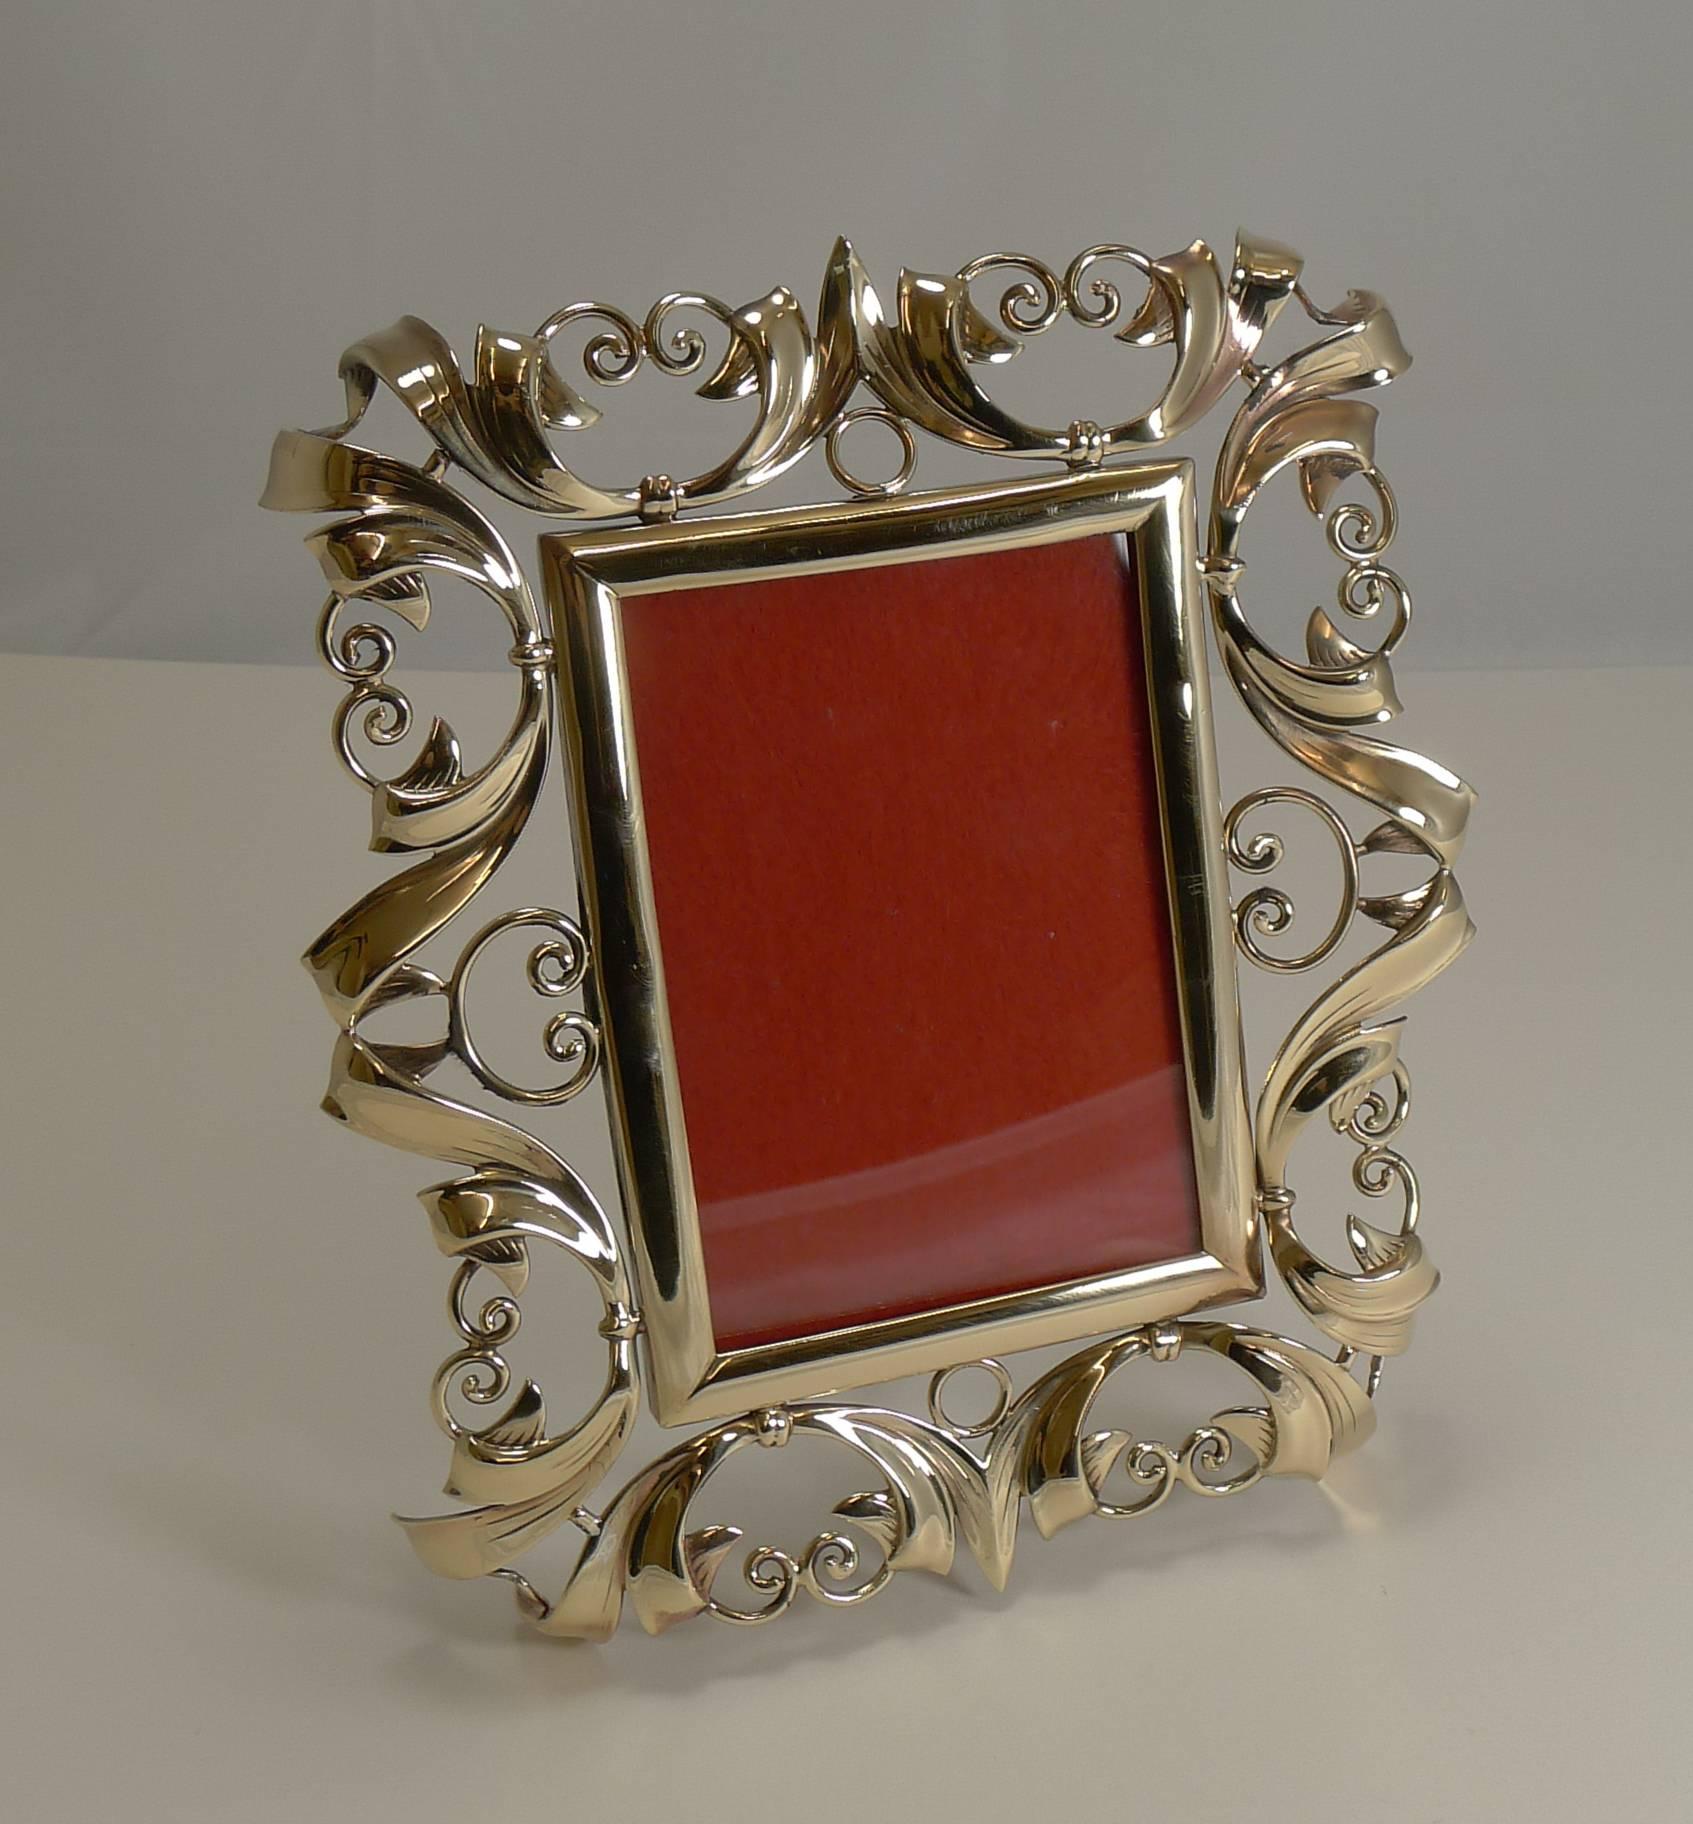 A beautiful and highly decorative photograph frame made from beautifully worked English brass having been professionally polished to gleam.

The back reveals the original folding easel back stand. Excellent condition with an overall measurement of